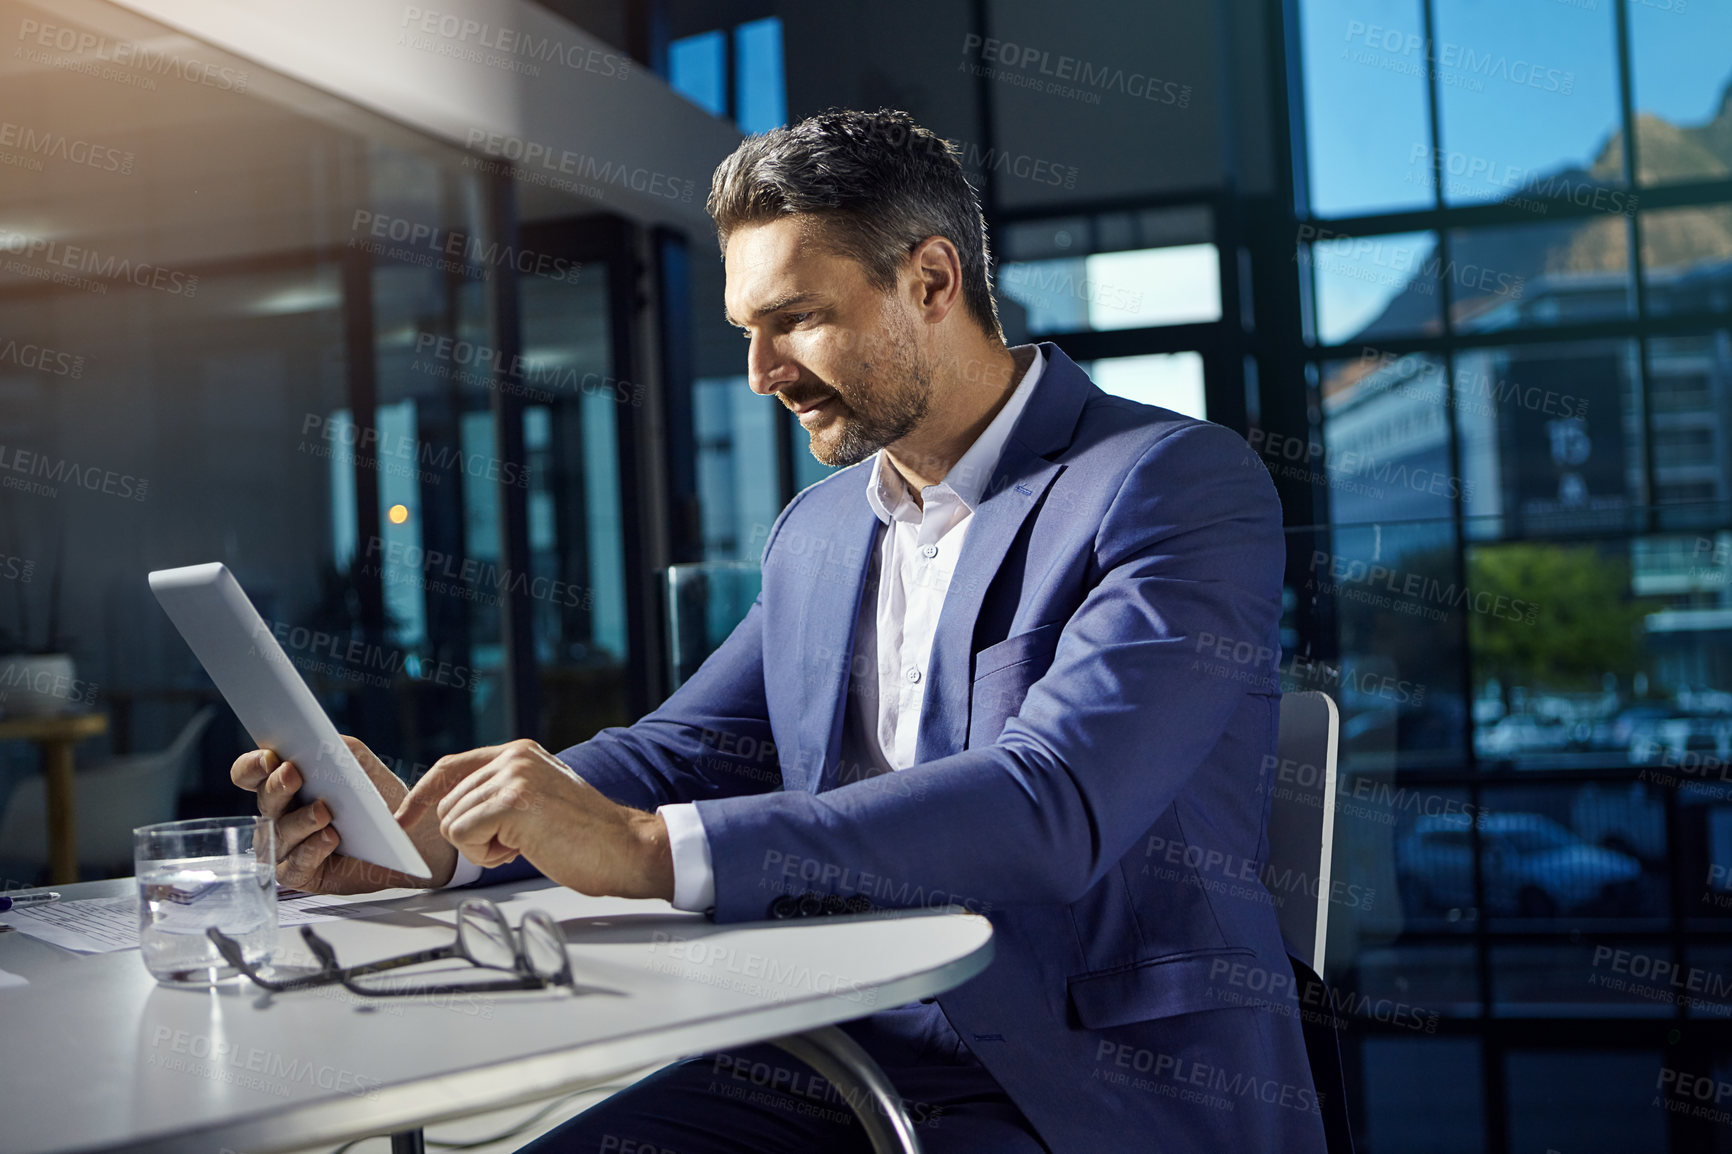 Buy stock photo Technology, modern office and businessman with tablet reading crypto data online. Financial trading, cryptocurrency and investment, man thinking at table with internet research or analytics.